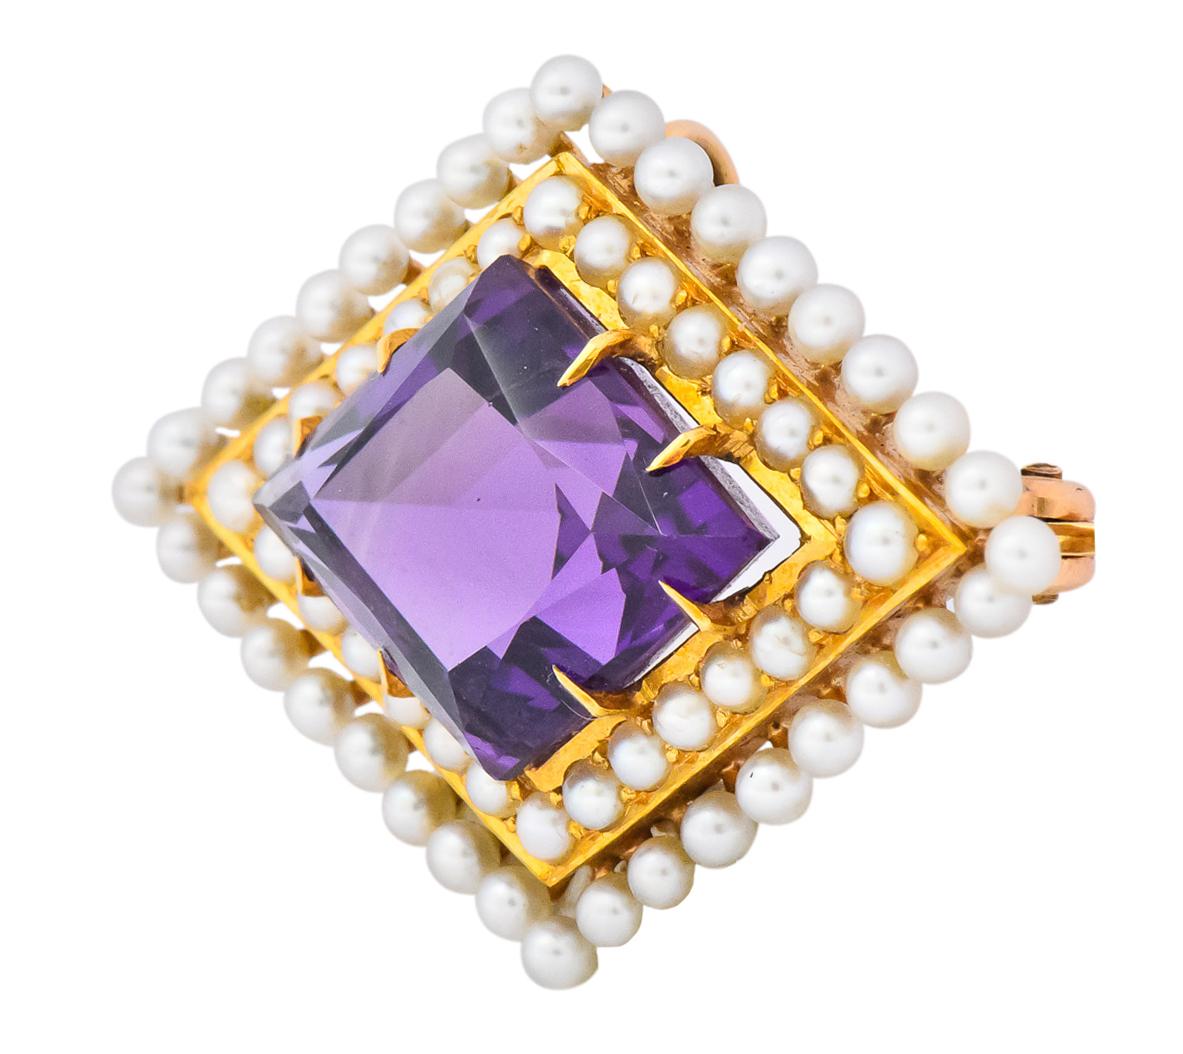 Centering a claw set rhombus cut amethyst measuring approximately 20.0 x 14.0 mm, transparent and a saturated purple

Surrounded by two rows of round freshwater natural pearls in a geometric formation, white and cream in body color with rose and